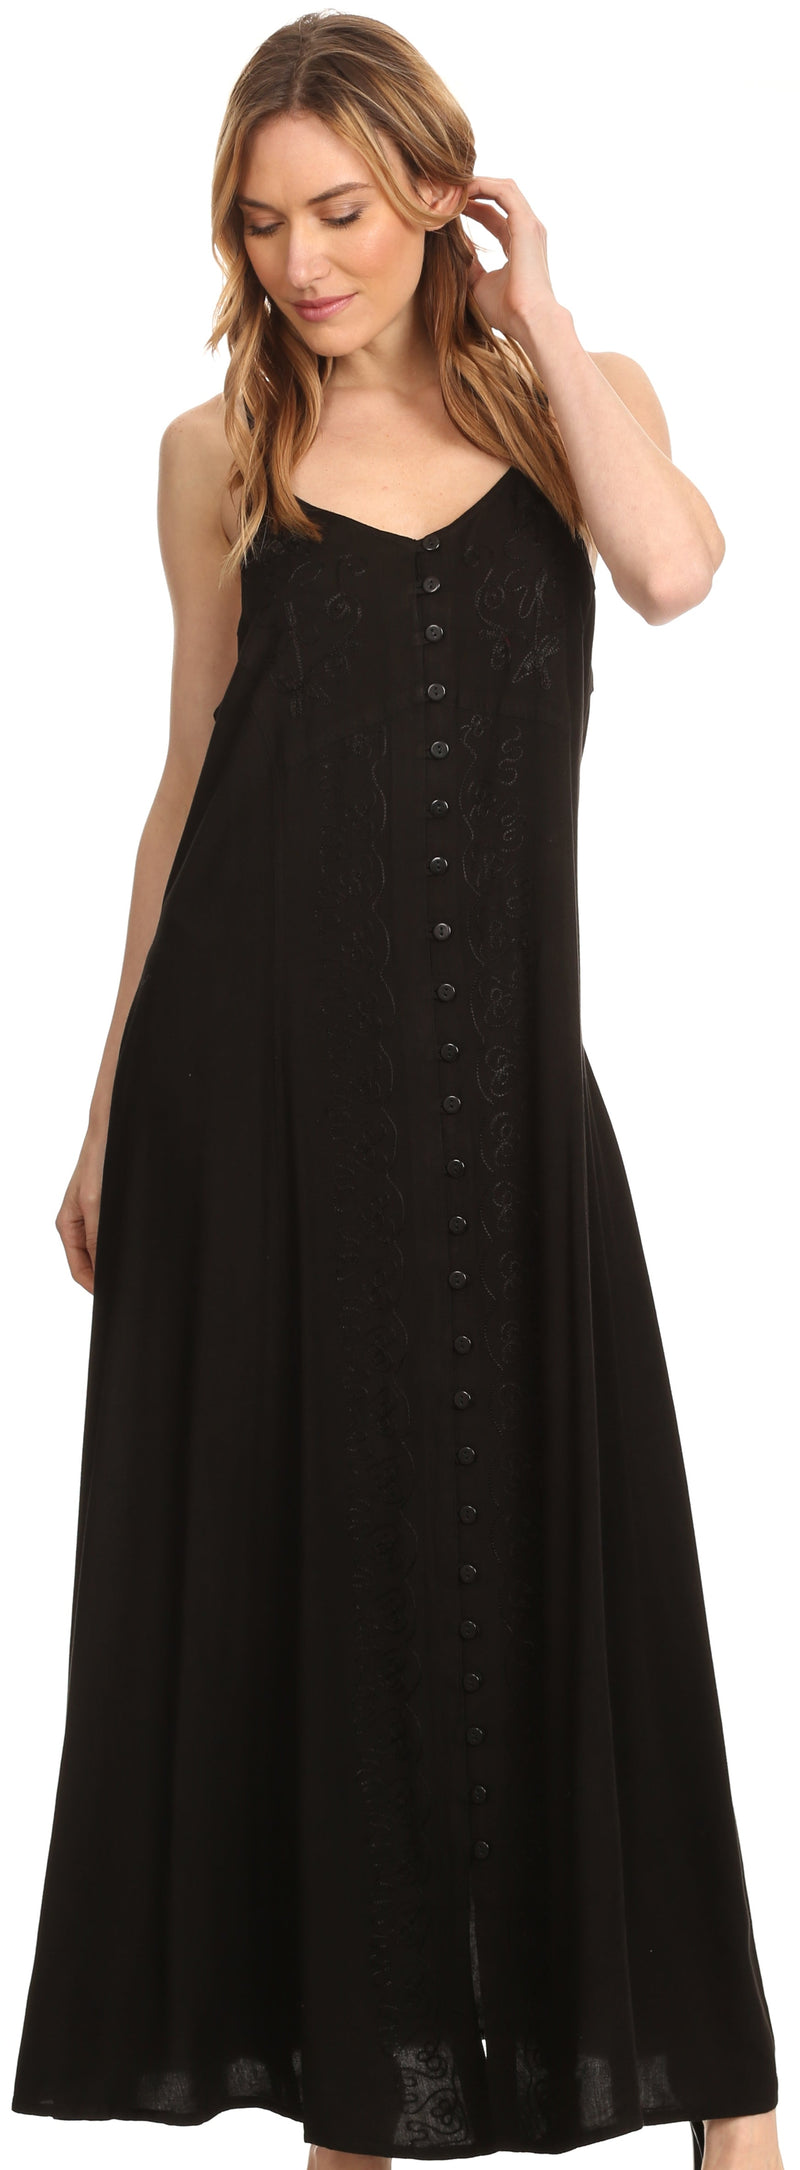 Sakkas Aisley Floral Embroidered Sleeveless Adjustable Strap Button Up Dress